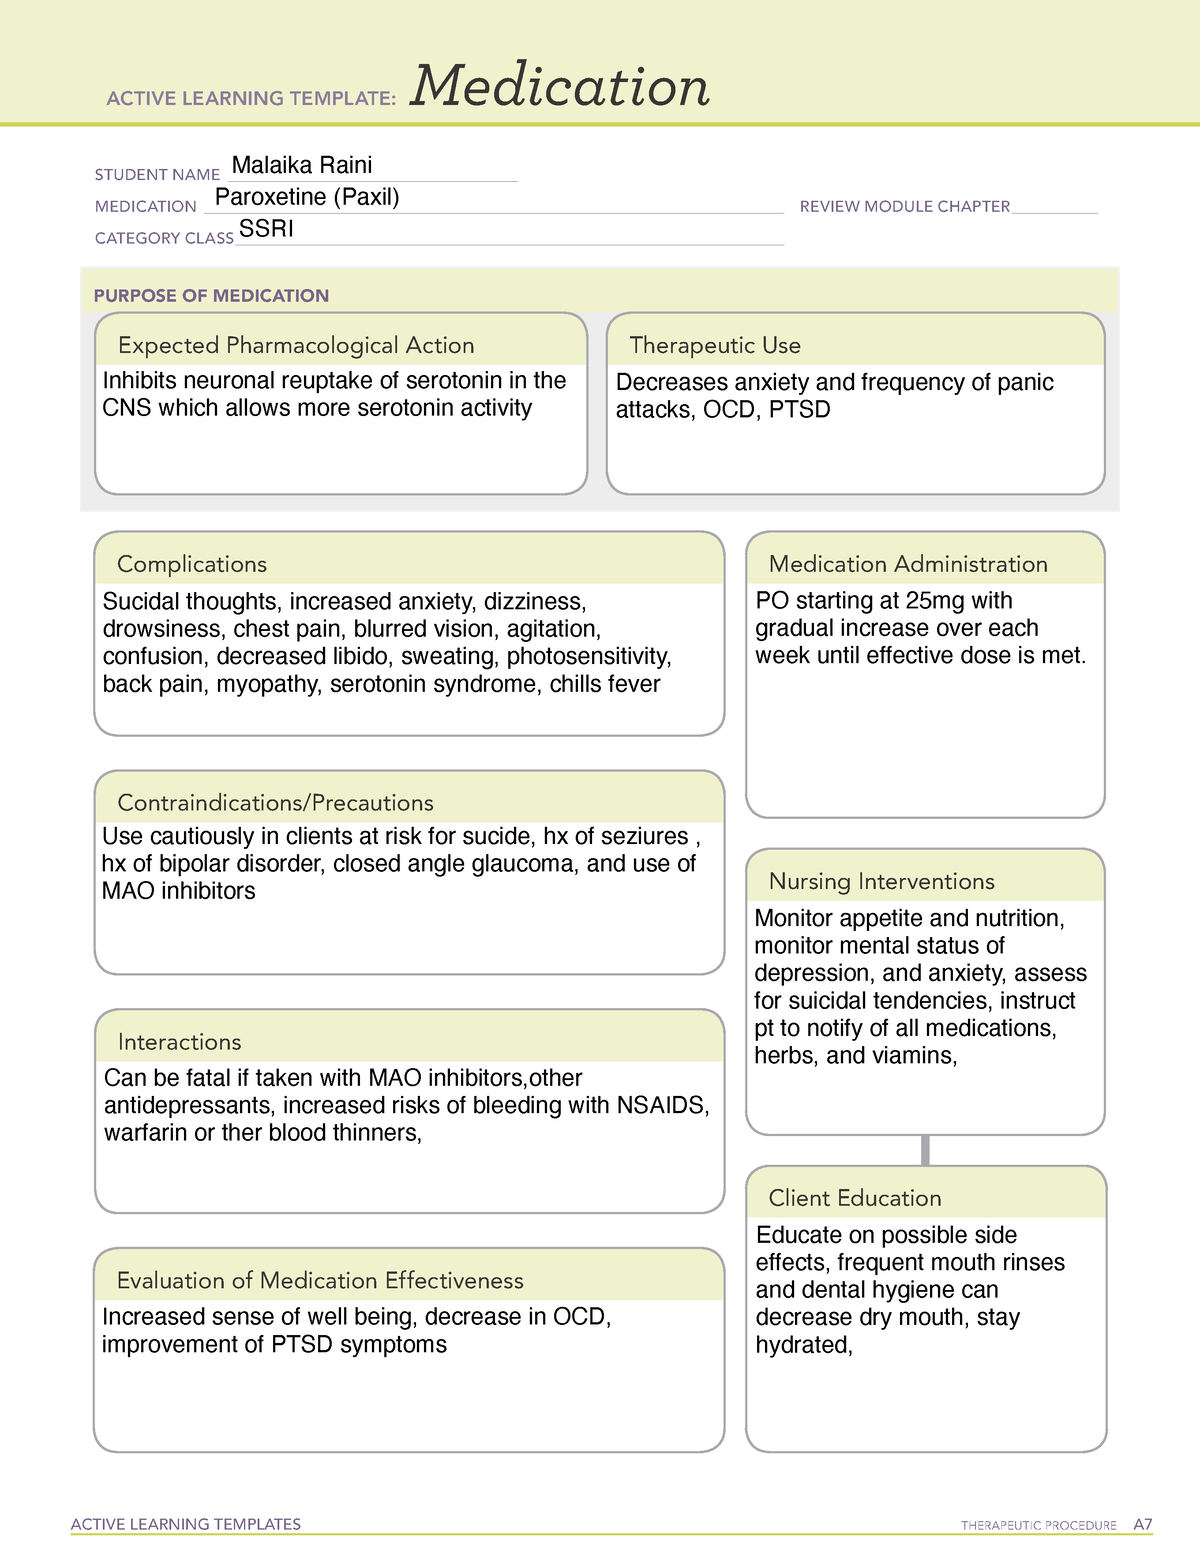 active-learning-template-medication-5-active-learning-templates-therapeutic-procedure-a